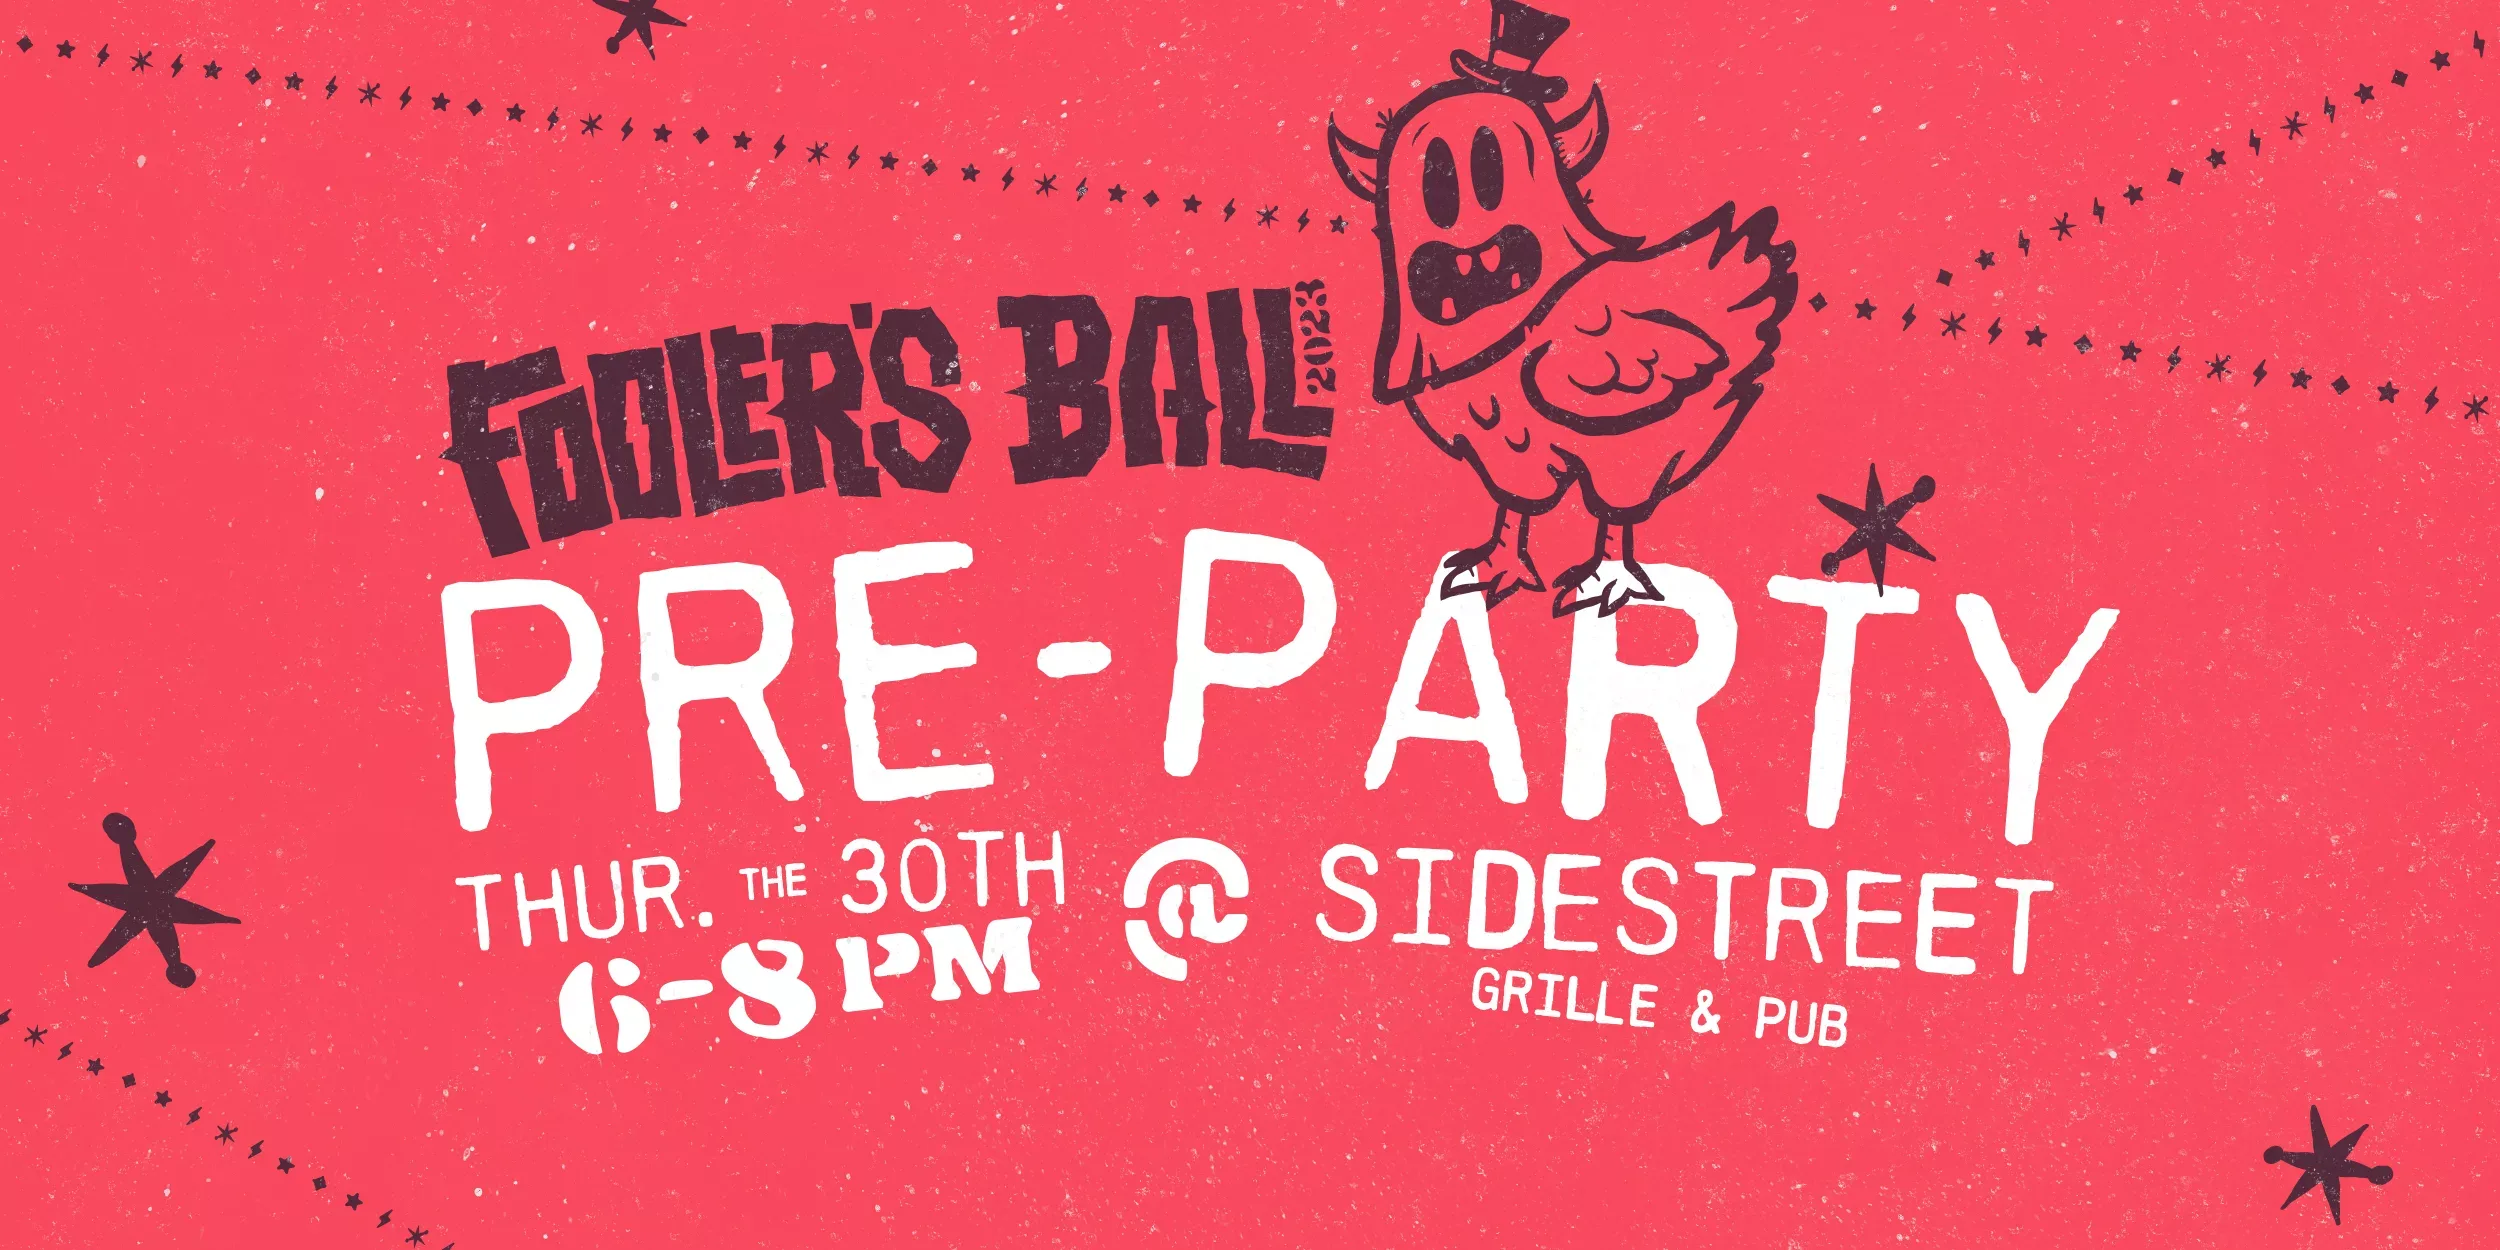 Foolers' Ball Pre-Party graphic